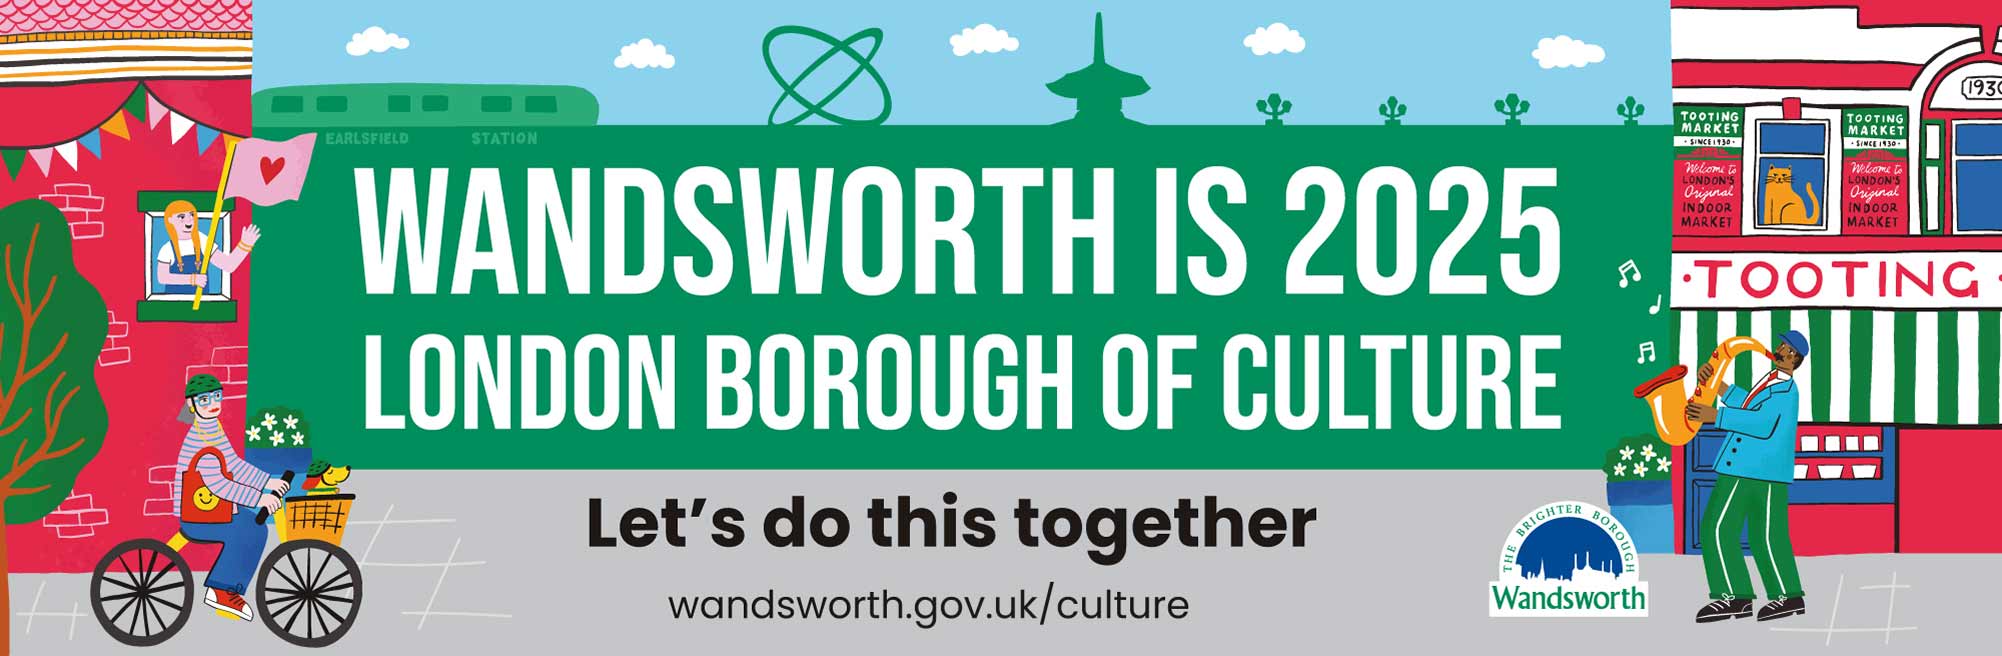 Wandsworth is London Borough of Culture 2025